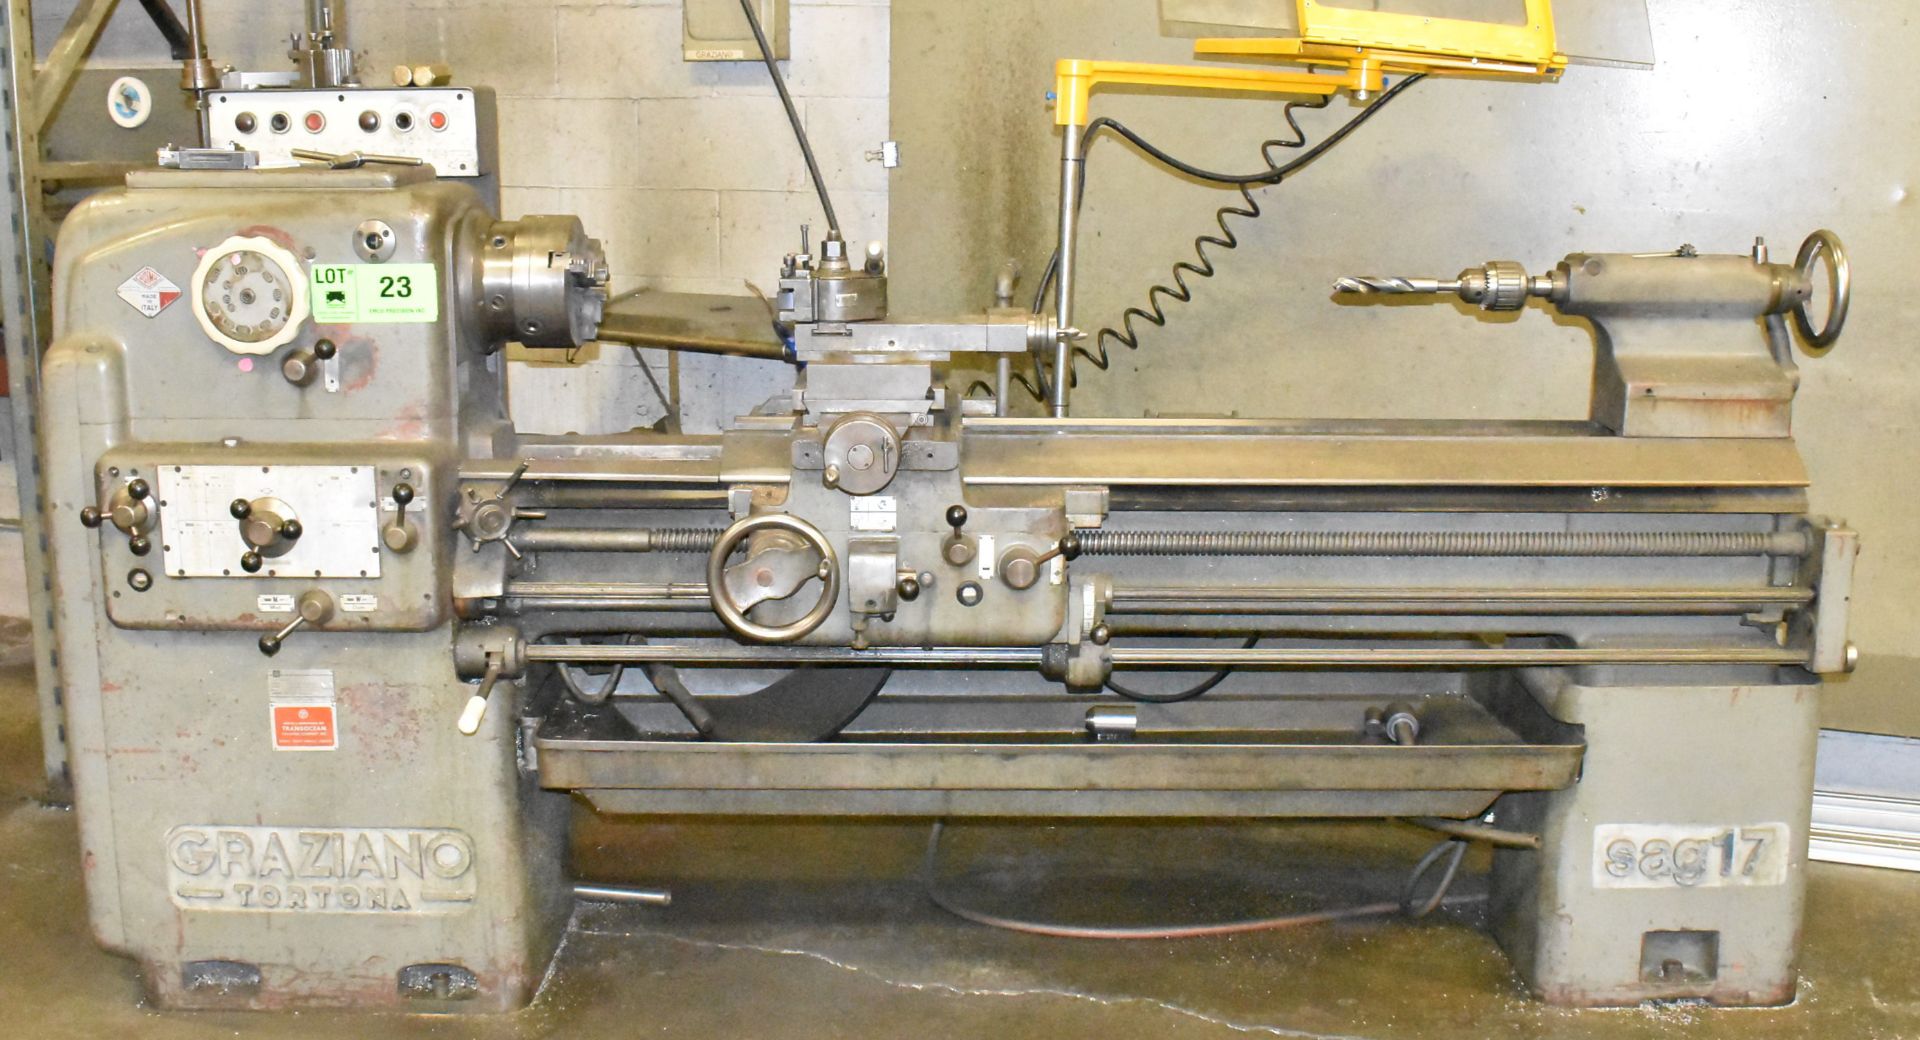 GRAZIANO TORTONA SAG 17 ENGINE LATHE WITH 8" 3-JAW CHUCK, 20" SWING, 52" BETWEEN CENTERS, 2" SPINDLE